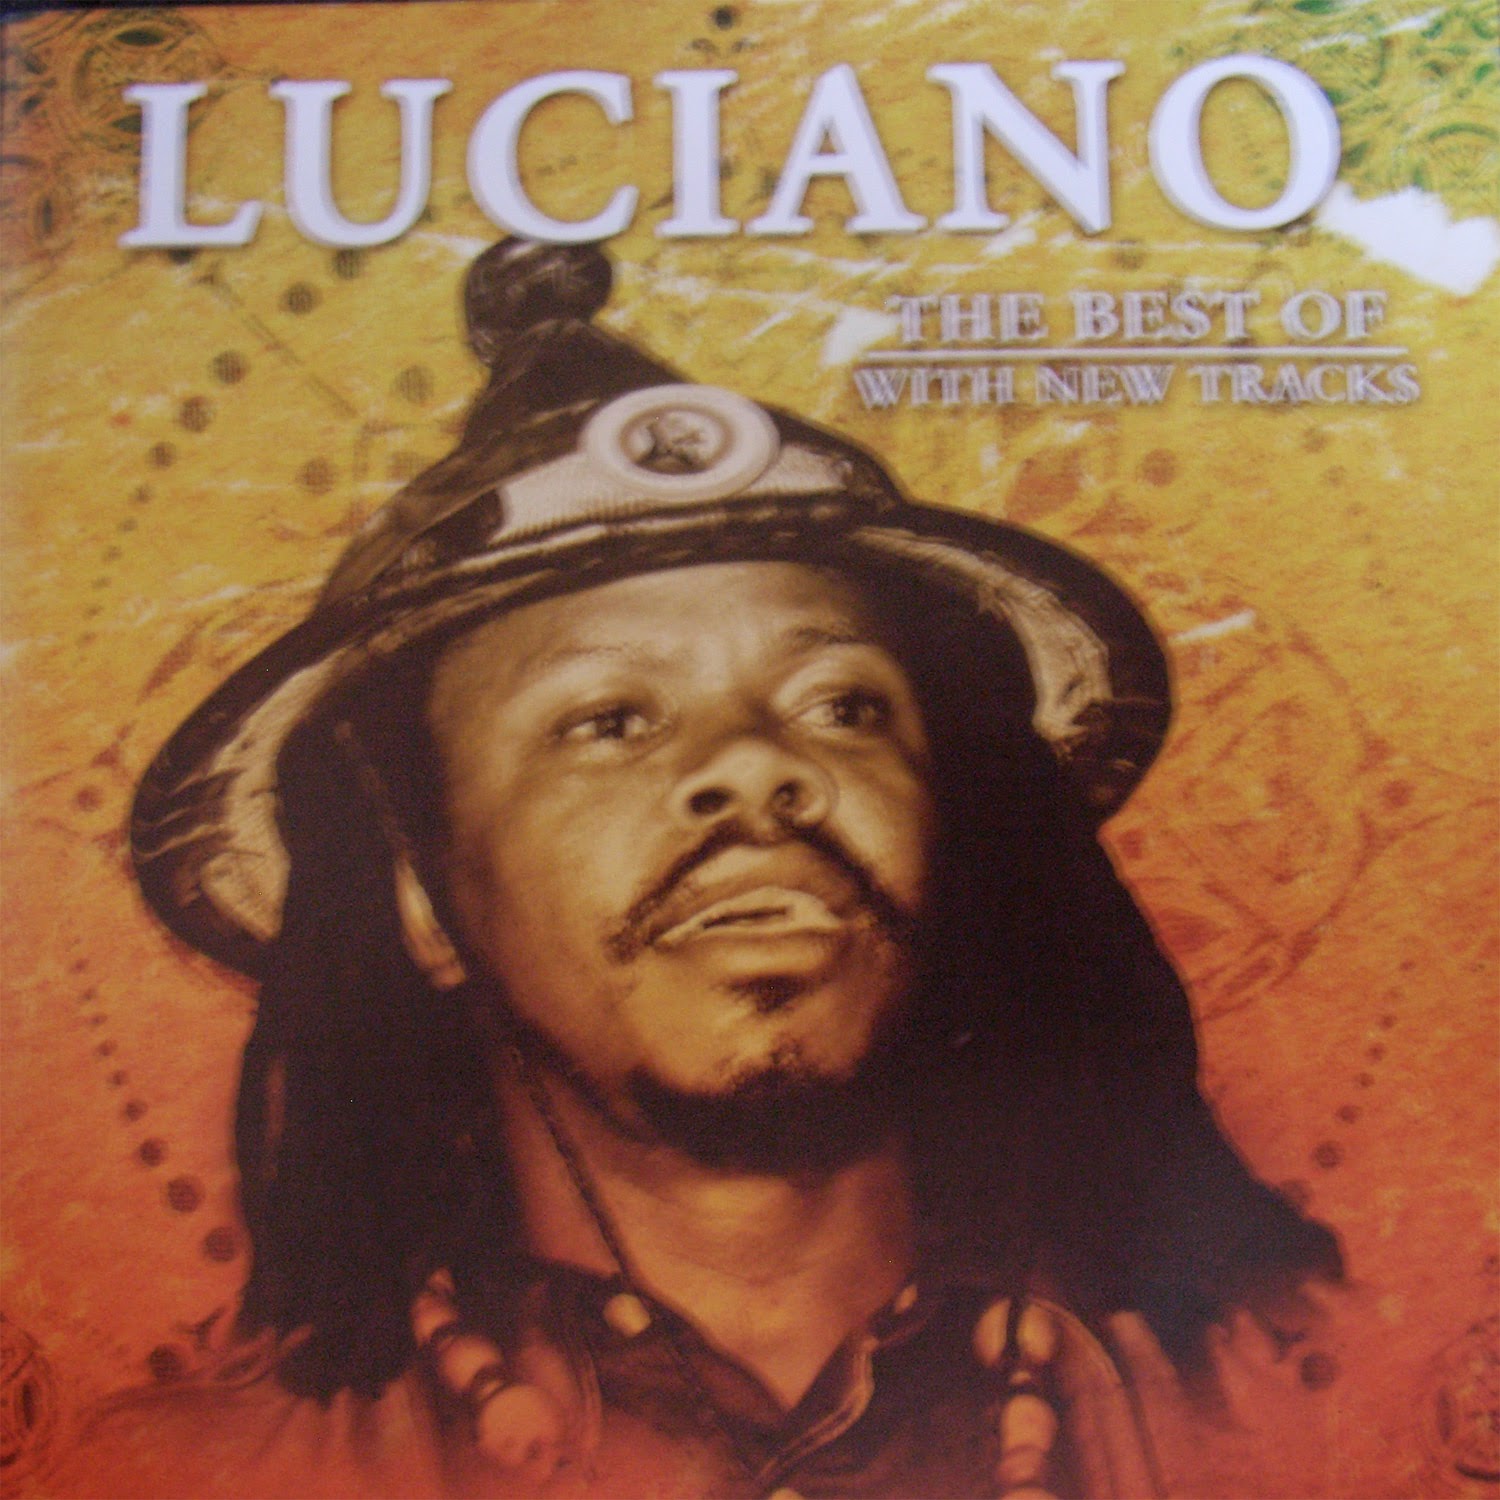 00-luciano-the_best_of_with_new_tracks-2006-cover_front-jah.jpg